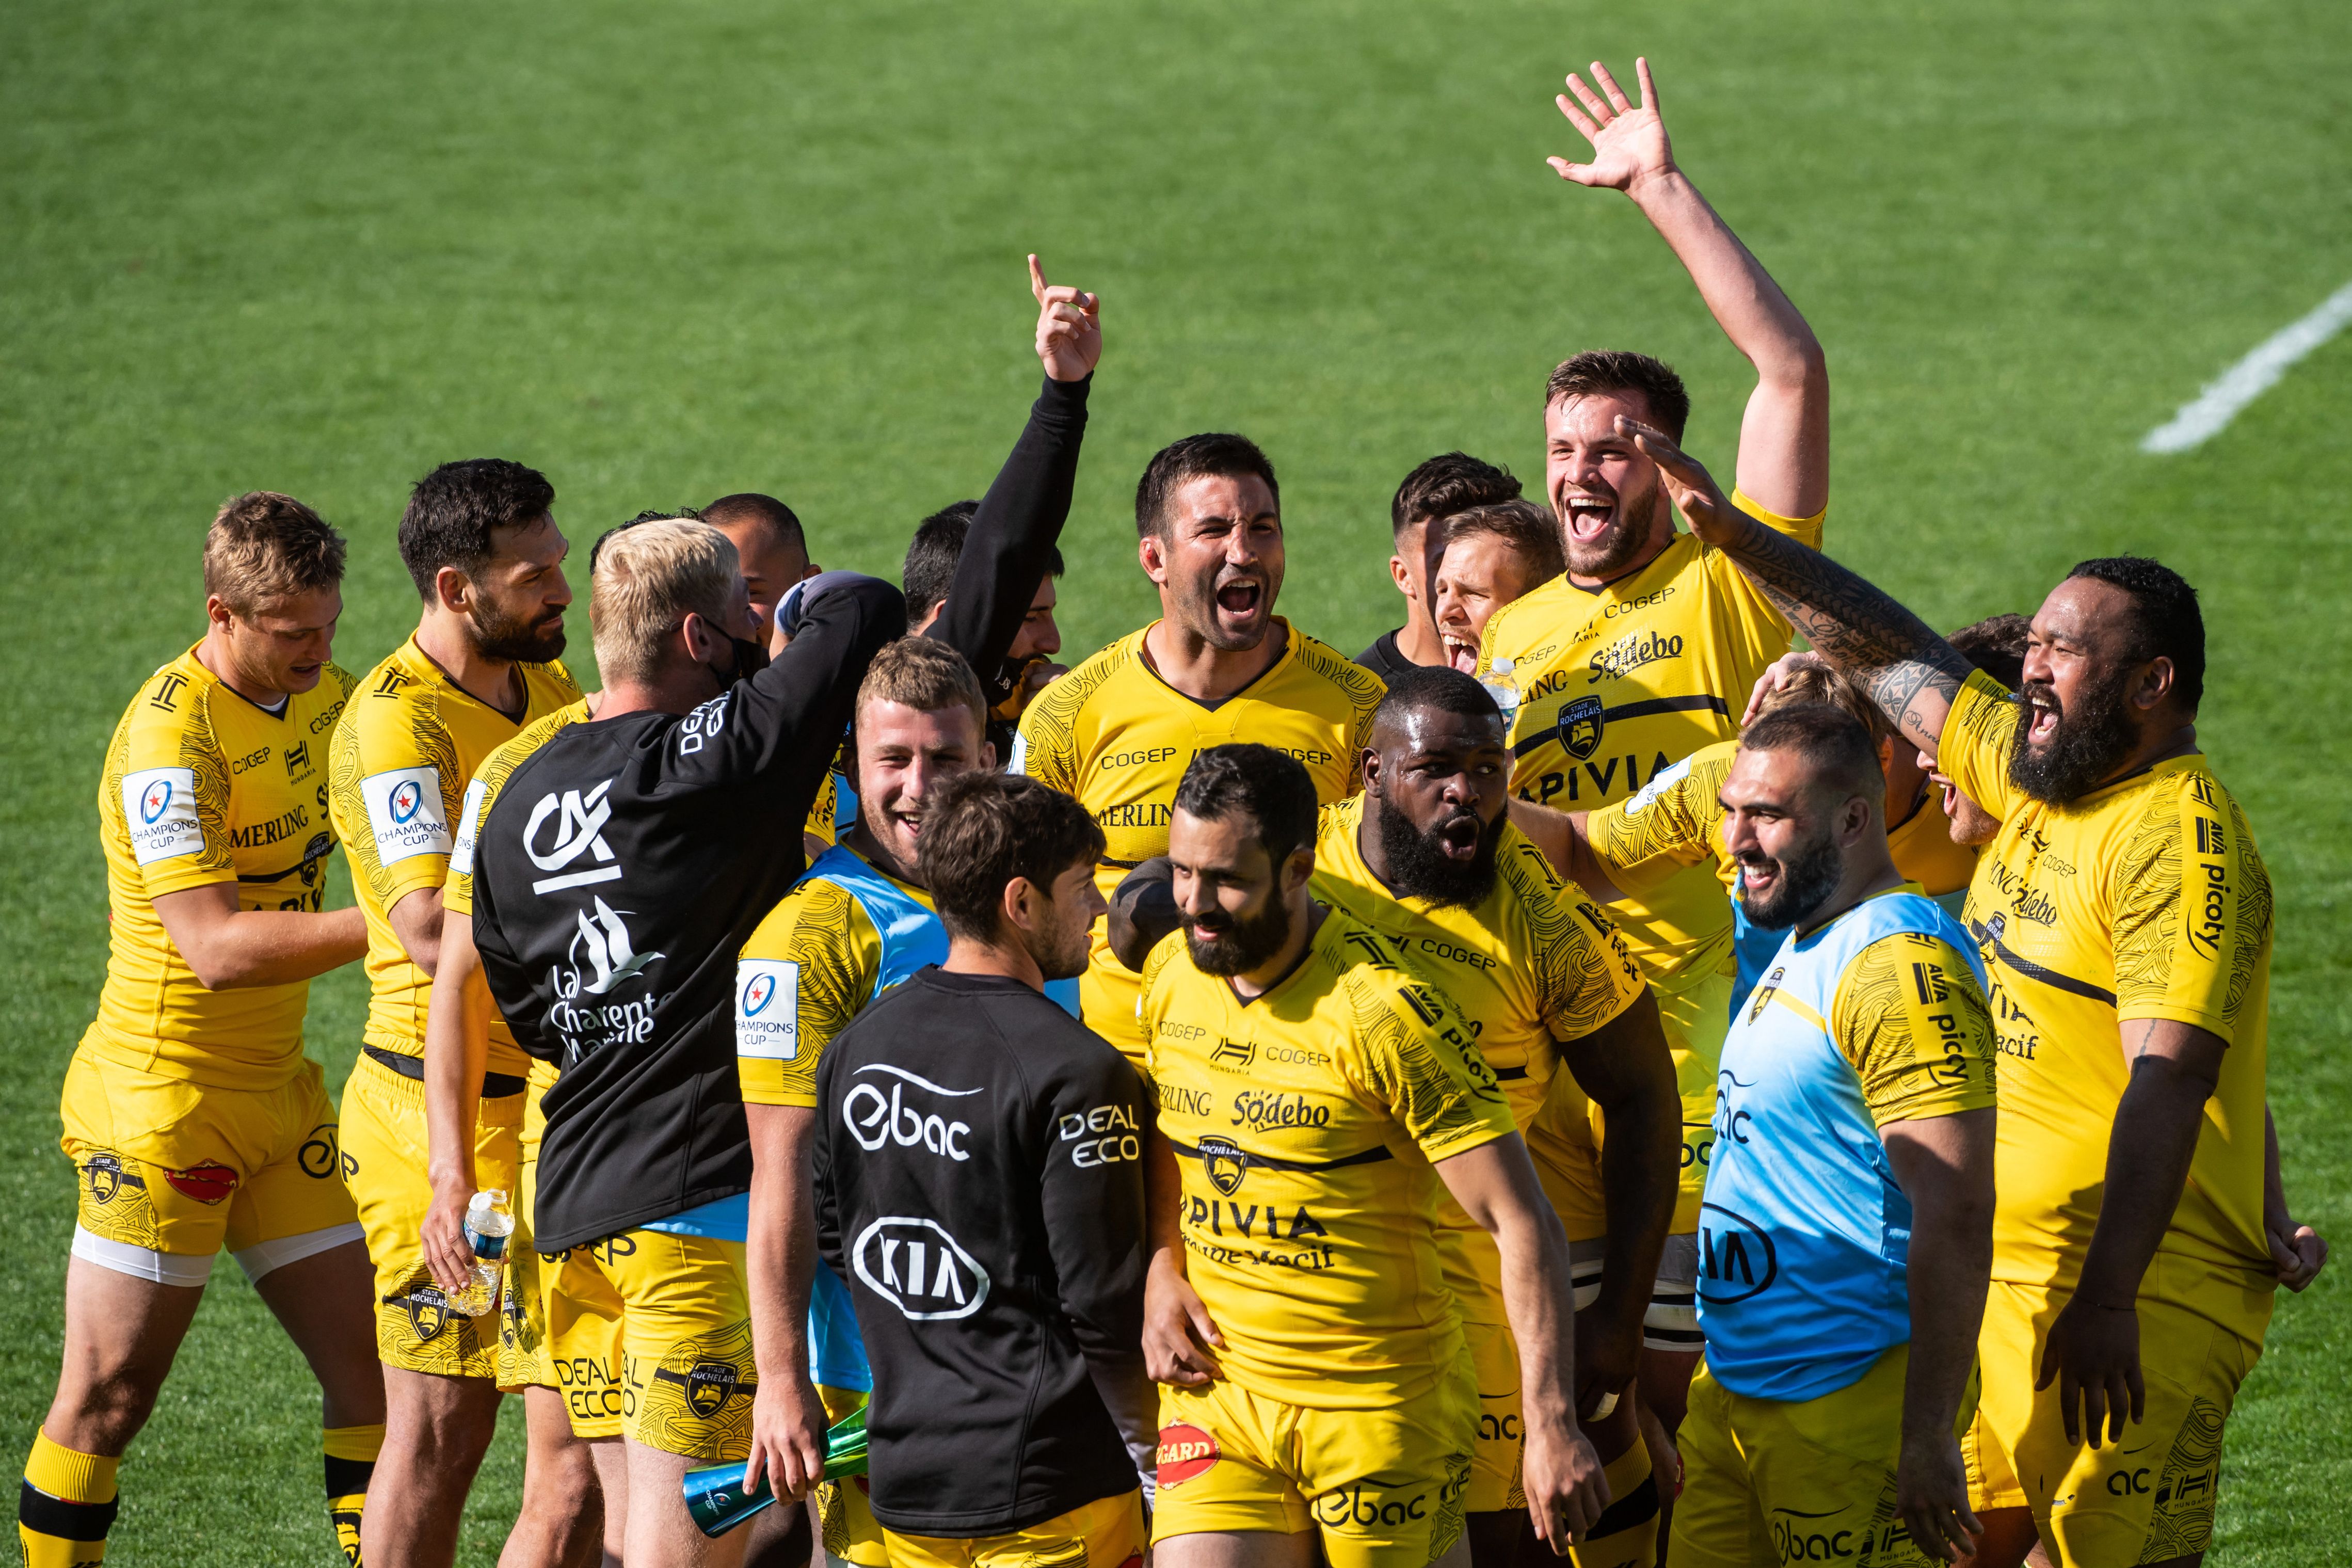 La Rochelle’s players celebrate reaching their first Champions Cup final